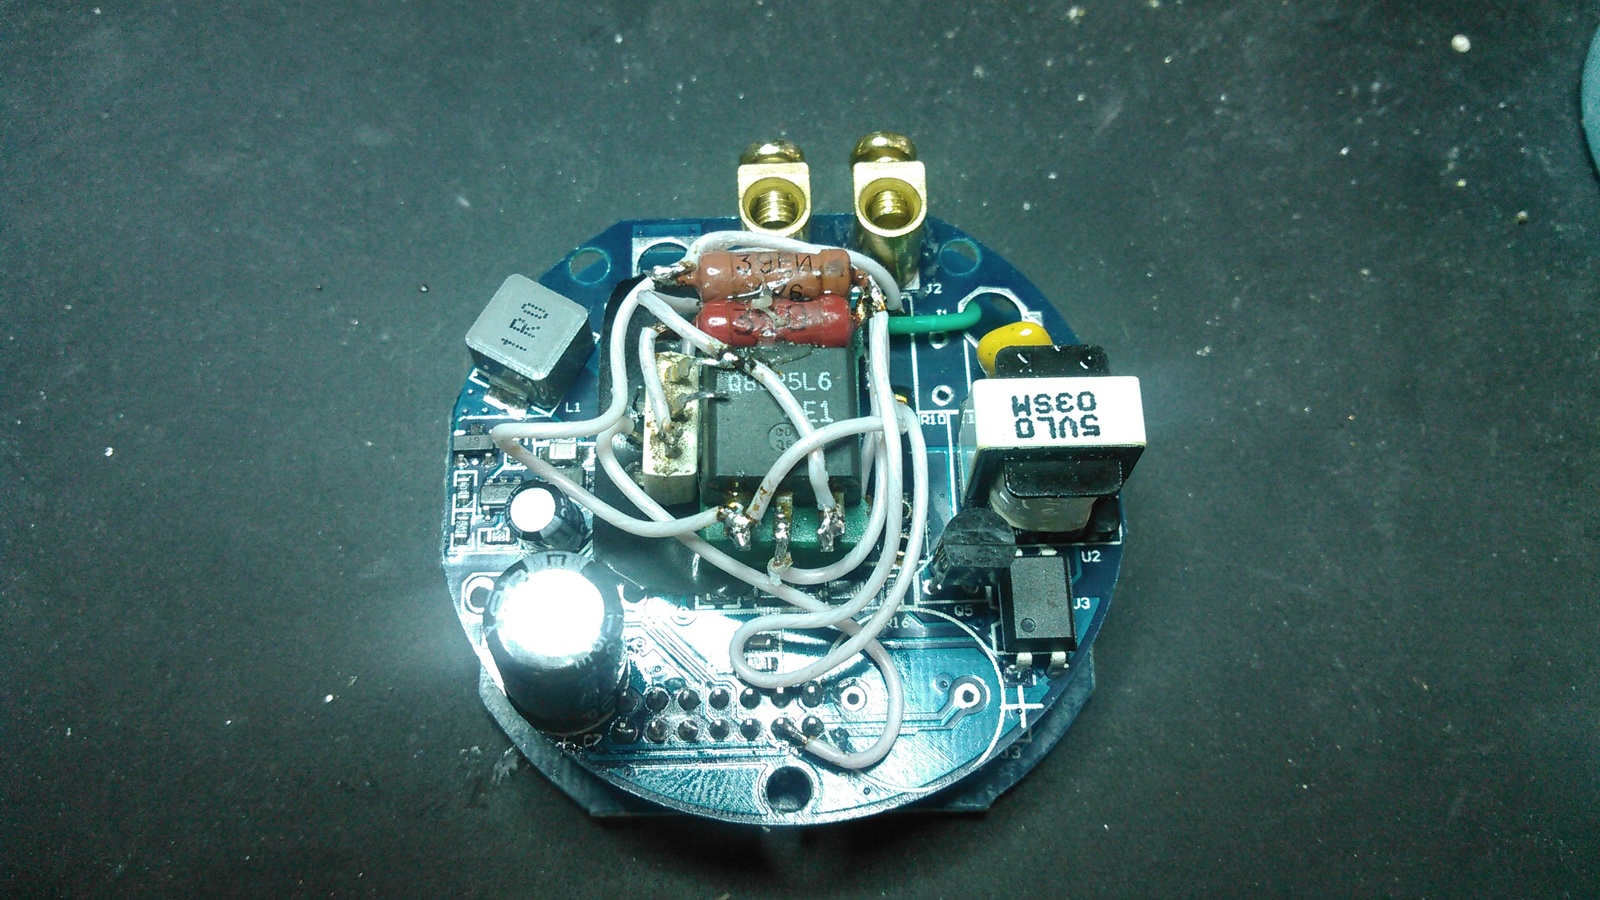 Replacing the e / m relay with a triac key in the Livolo switch - Longpost, Soldering, Relay, Switch, Livolo, My